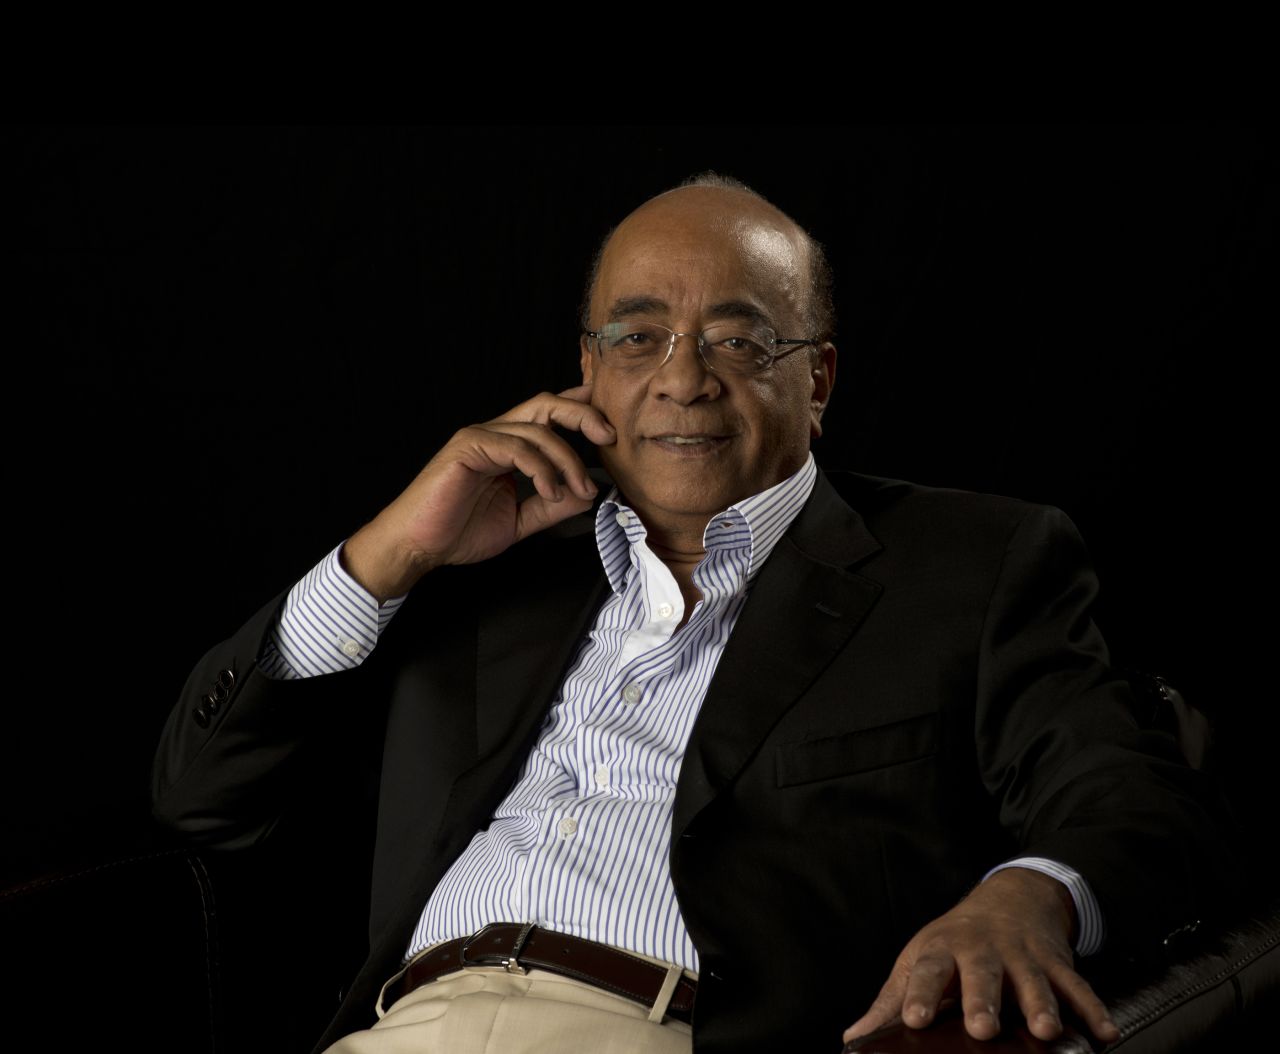 Mo Ibrahim is a Sudanese communications billionaire. He created the foundation bearing his name in 2006, with the aim of improving leadership and governance in Africa. 